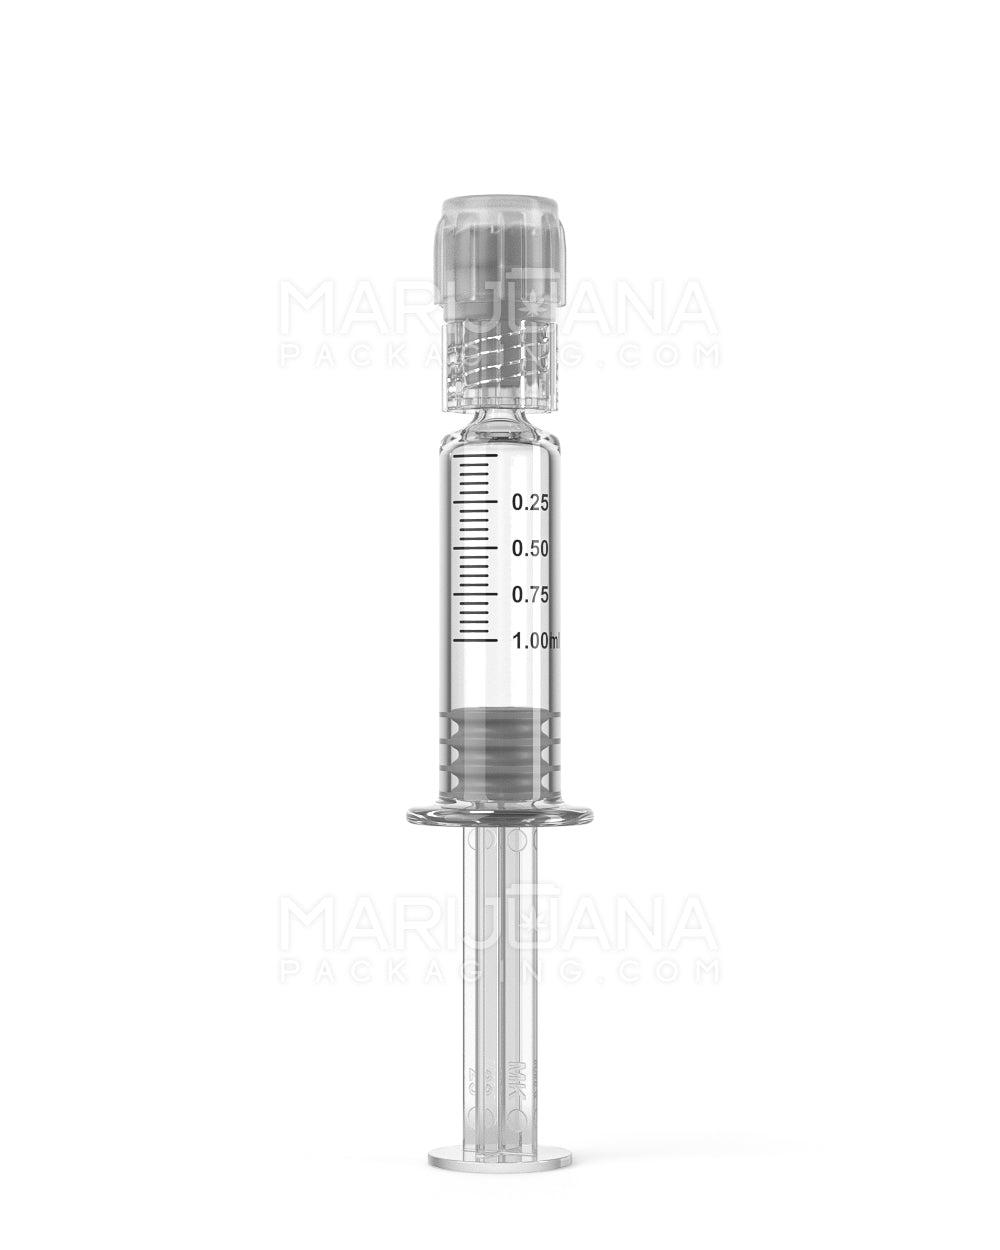 Child Resistant & Luer Lock | Glass Dab Applicator Syringes | 1mL - 0.25mL Increments - 100 Count - 1